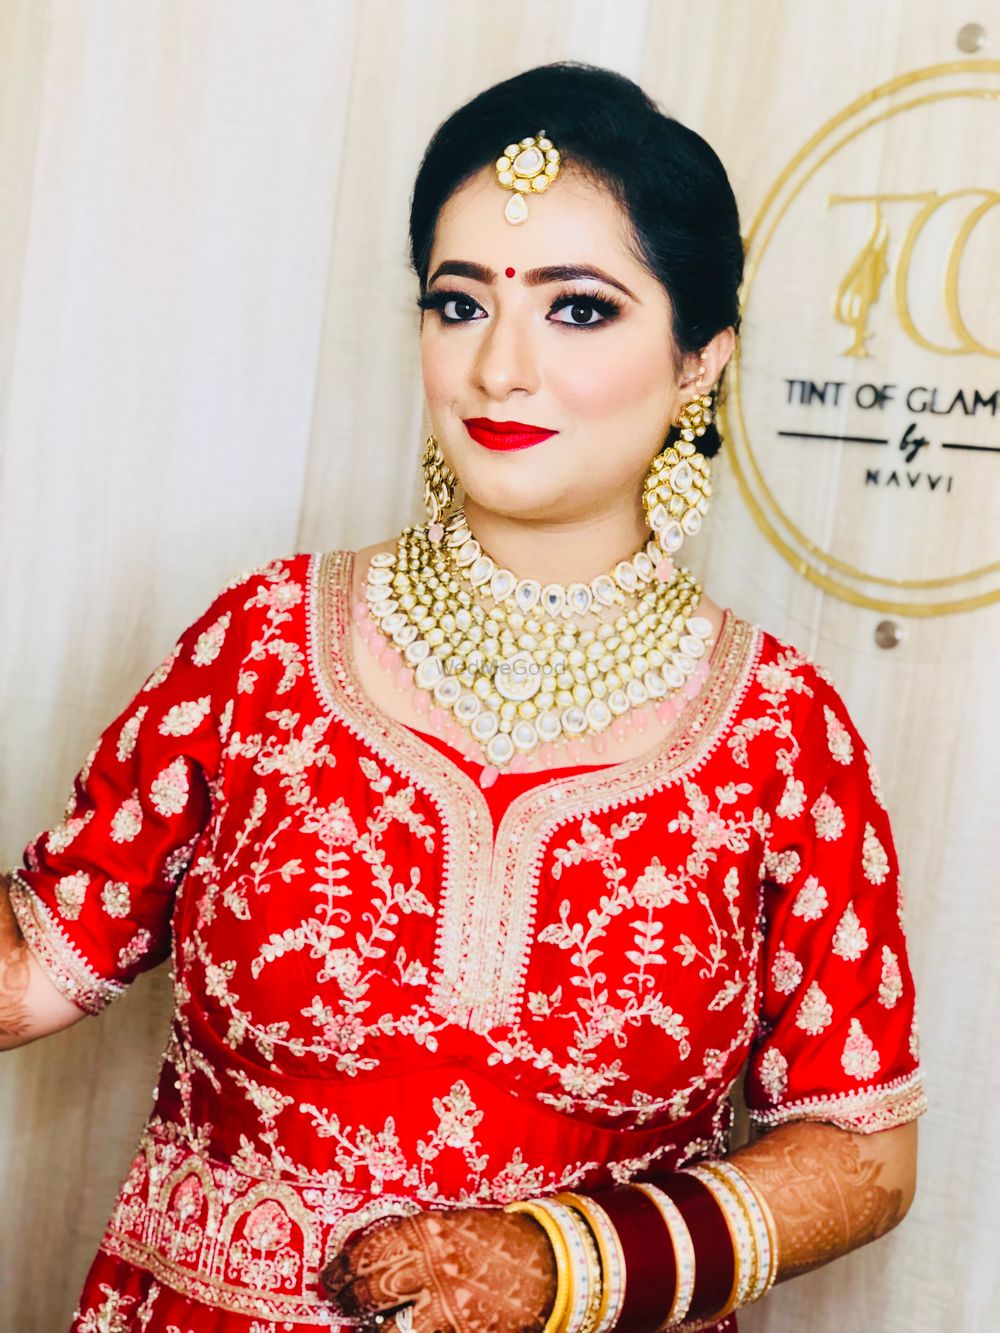 Photo From Bridal Makeup - By Tint of Glamour by Navvi